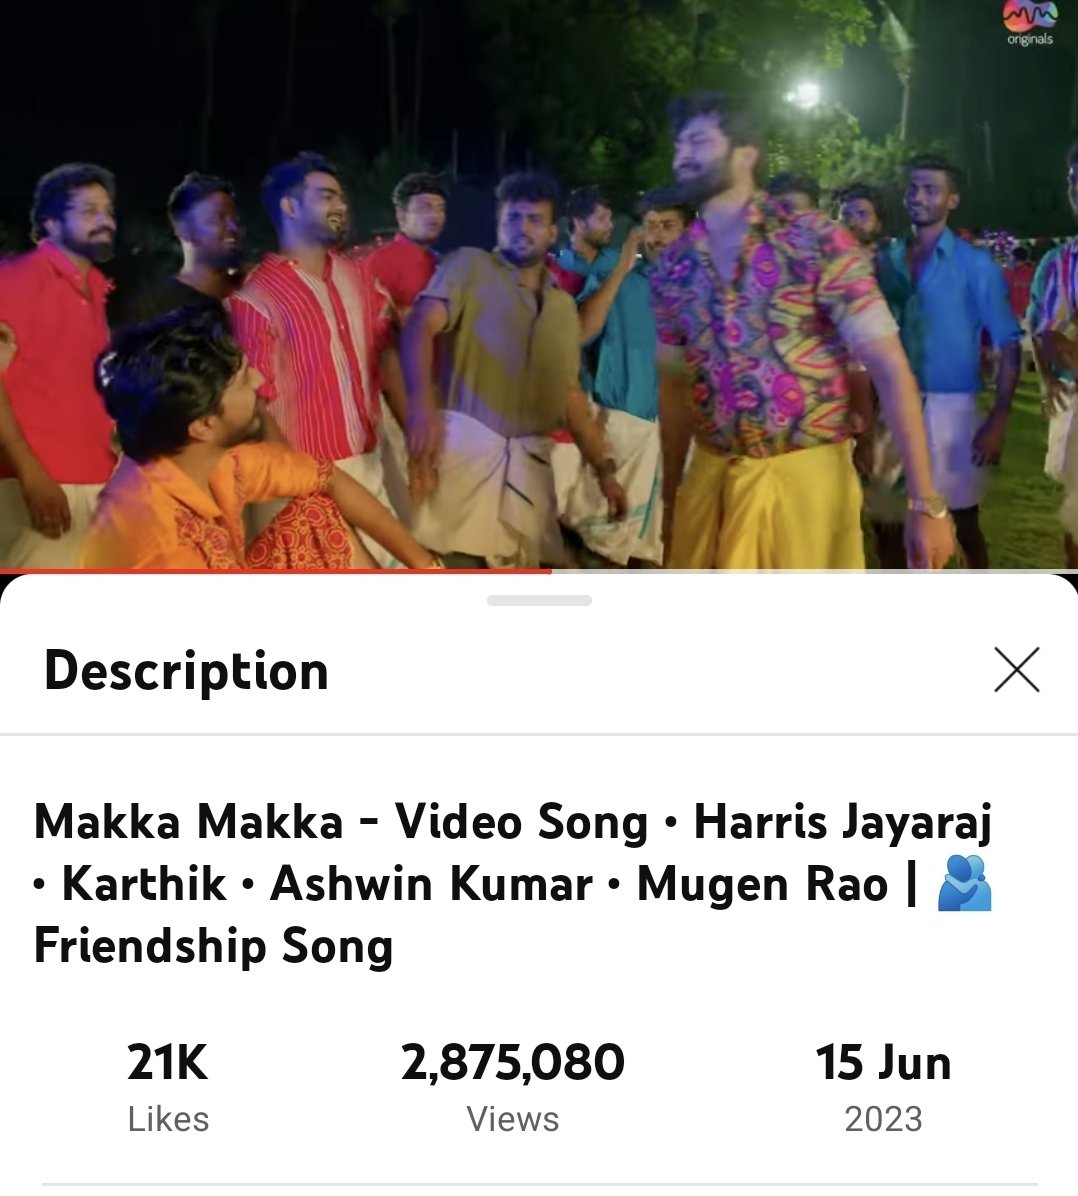 Hey fam, let's stream #MakkaMakka and dance to the music! It's a fun and upbeat friendship song that will get us all moving and grooving. Let's celebrate our friendship and have a great time together!
#Ashwinkumar